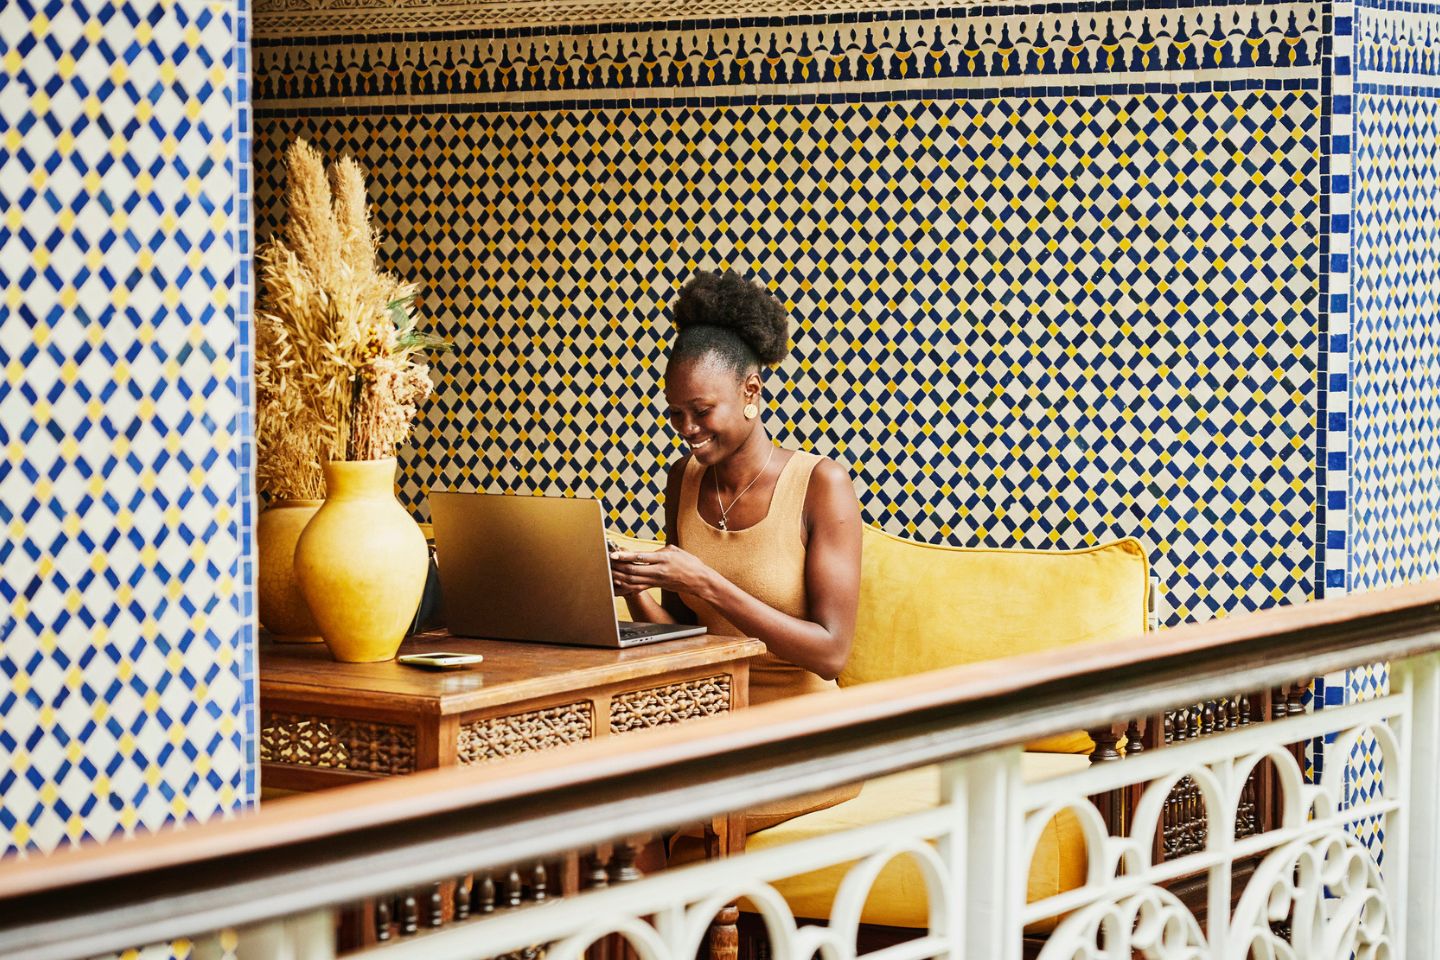 Digital Nomad Woman Working Remotely